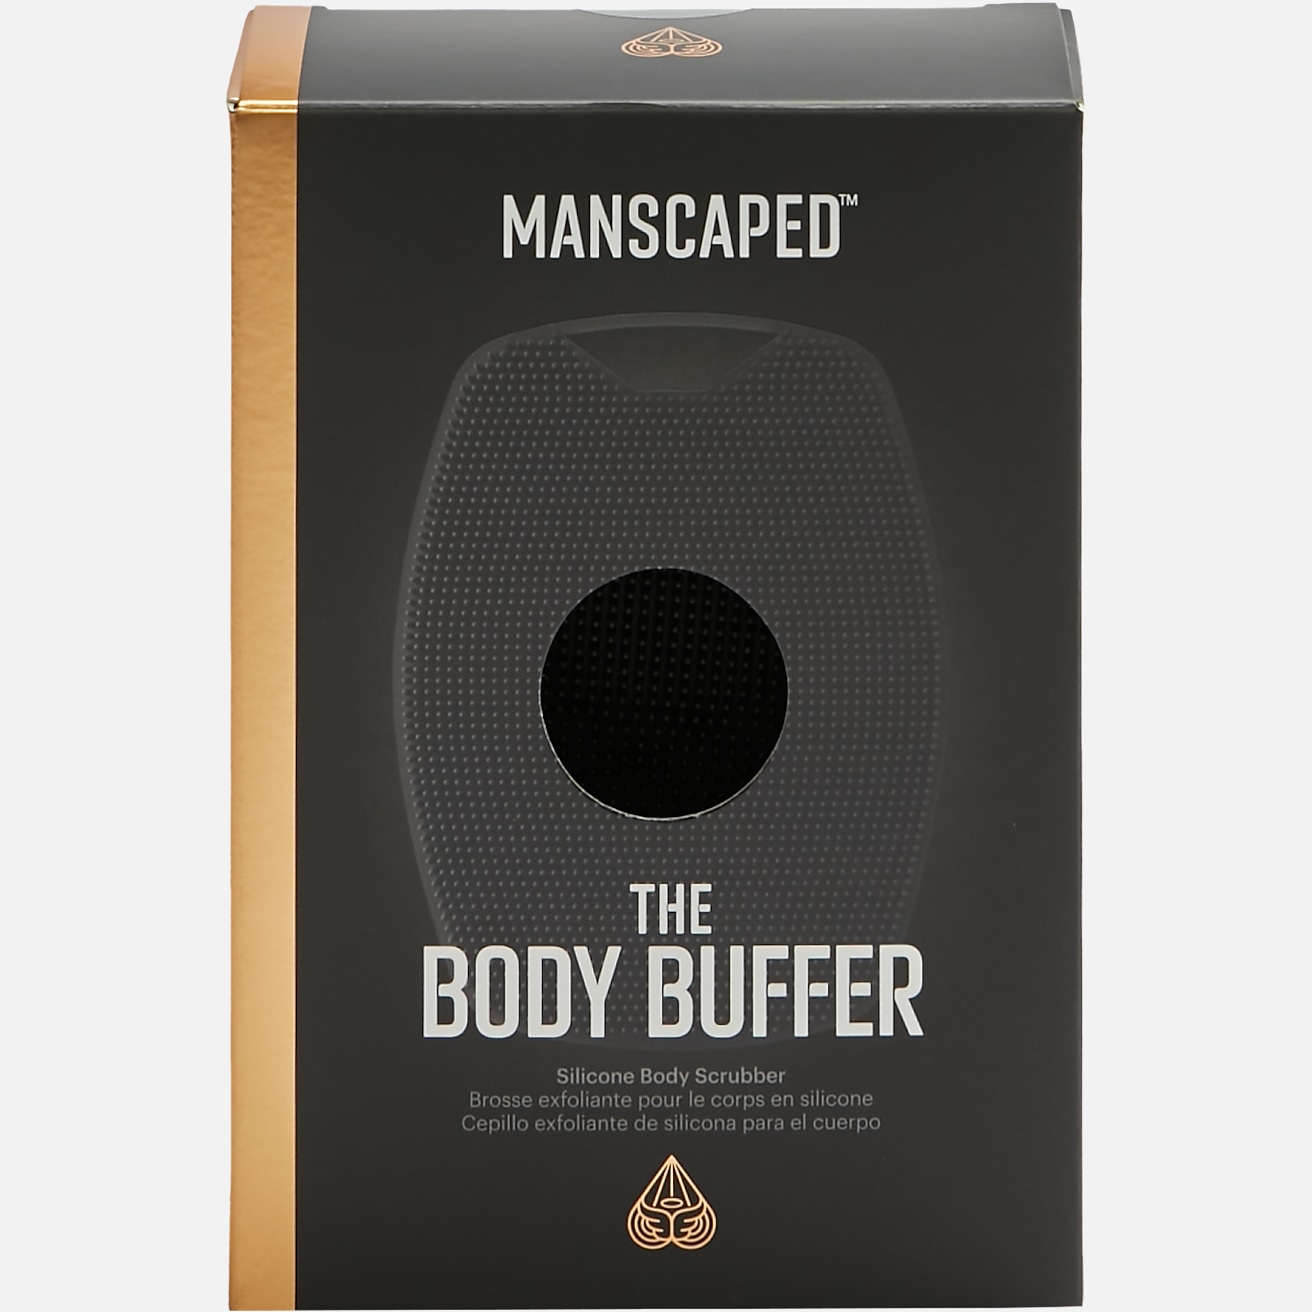 Manscaped The Body Buffer, Gifts